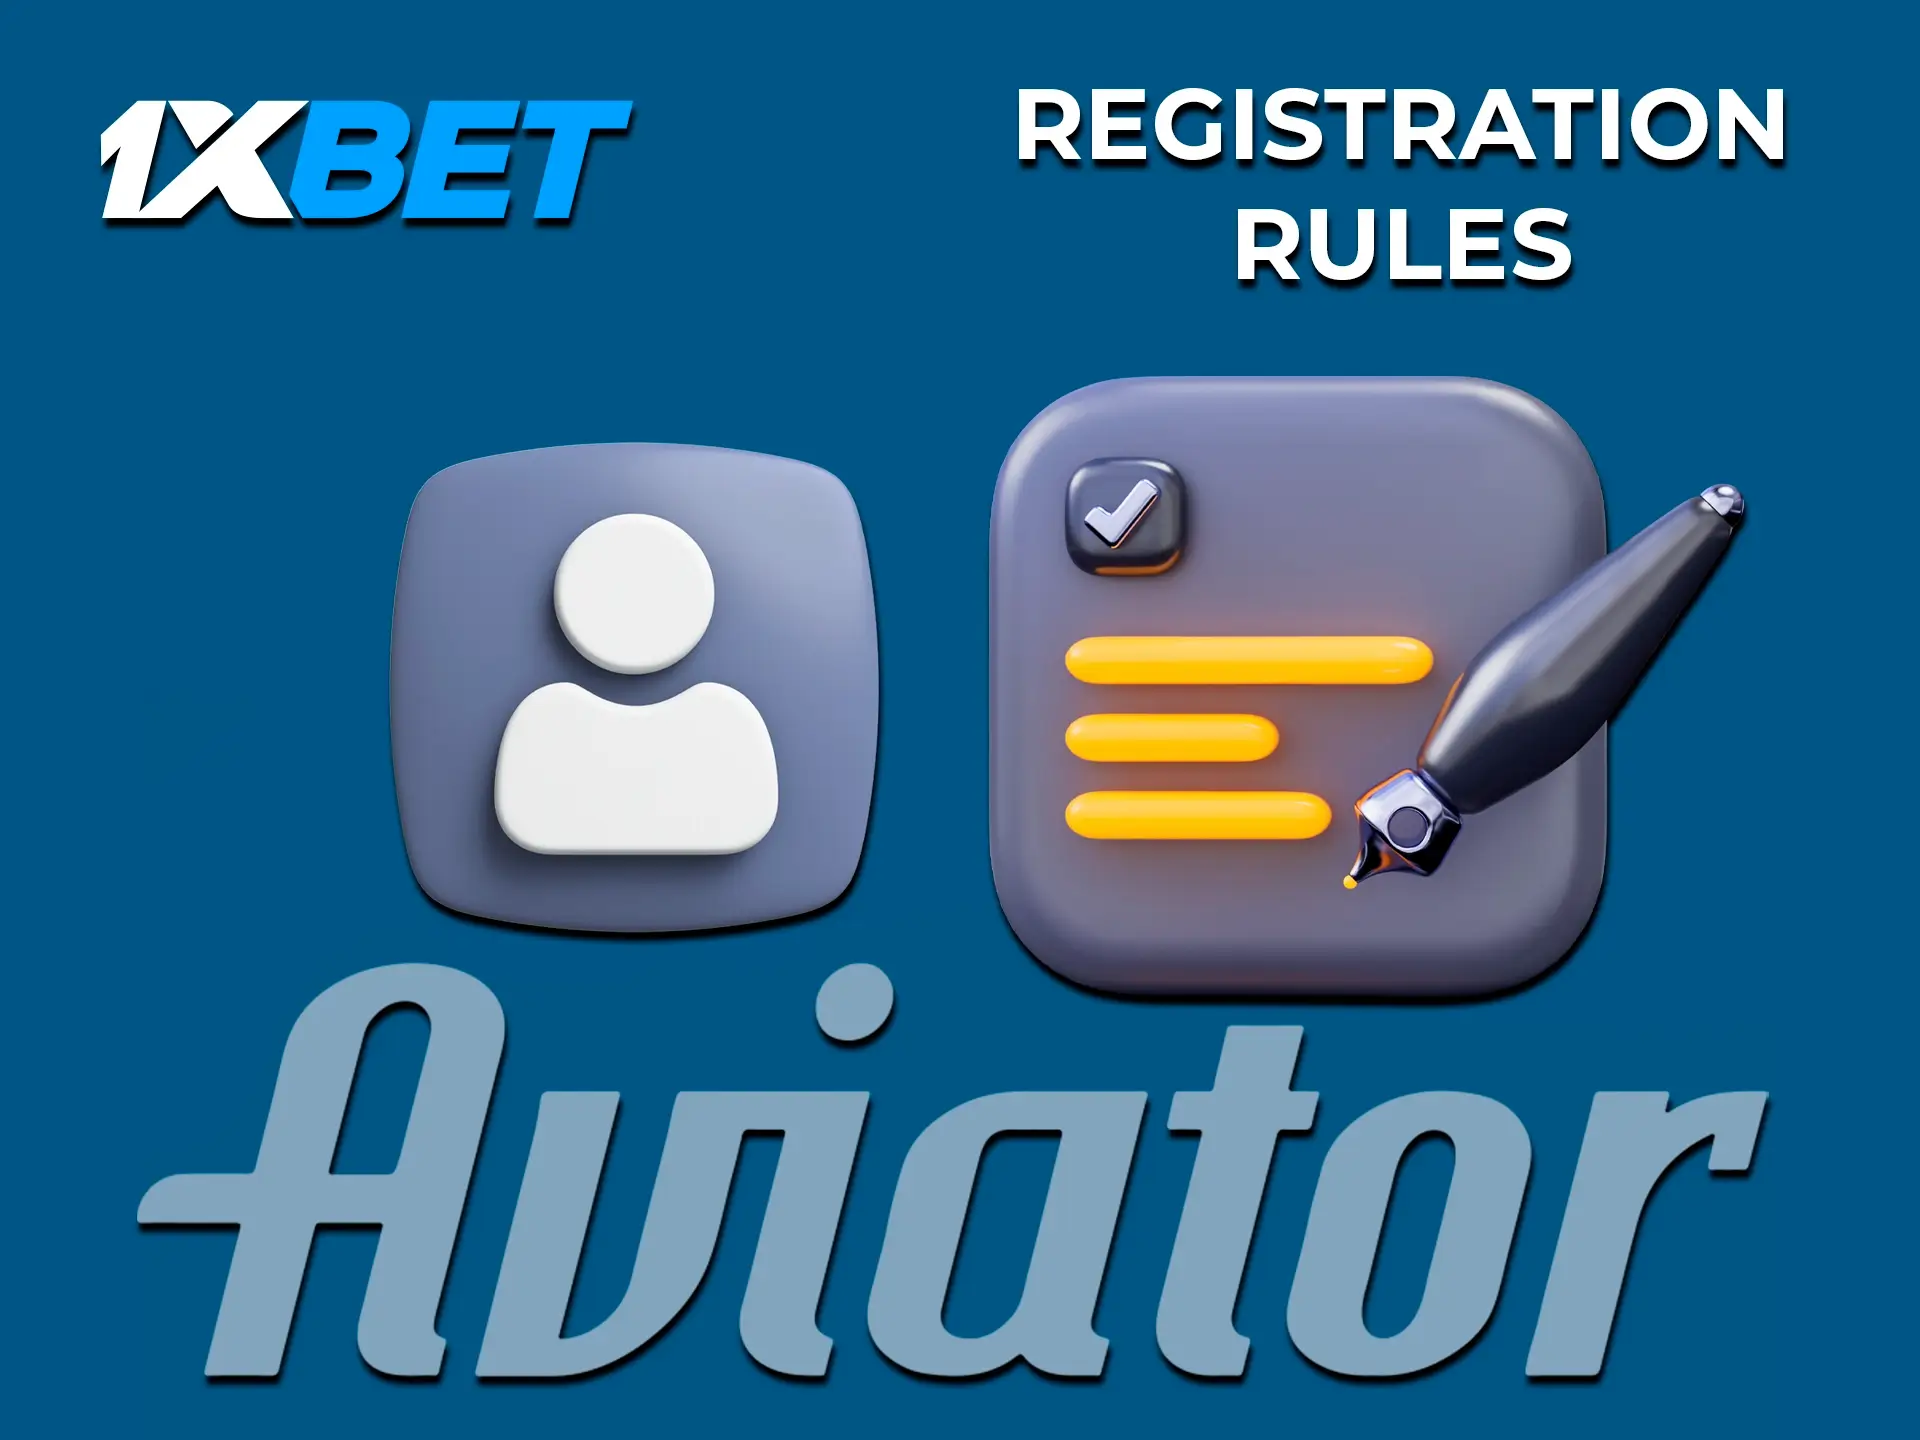 Learn the basics and rules for registering at 1xBet so you won't have any problems in the process.